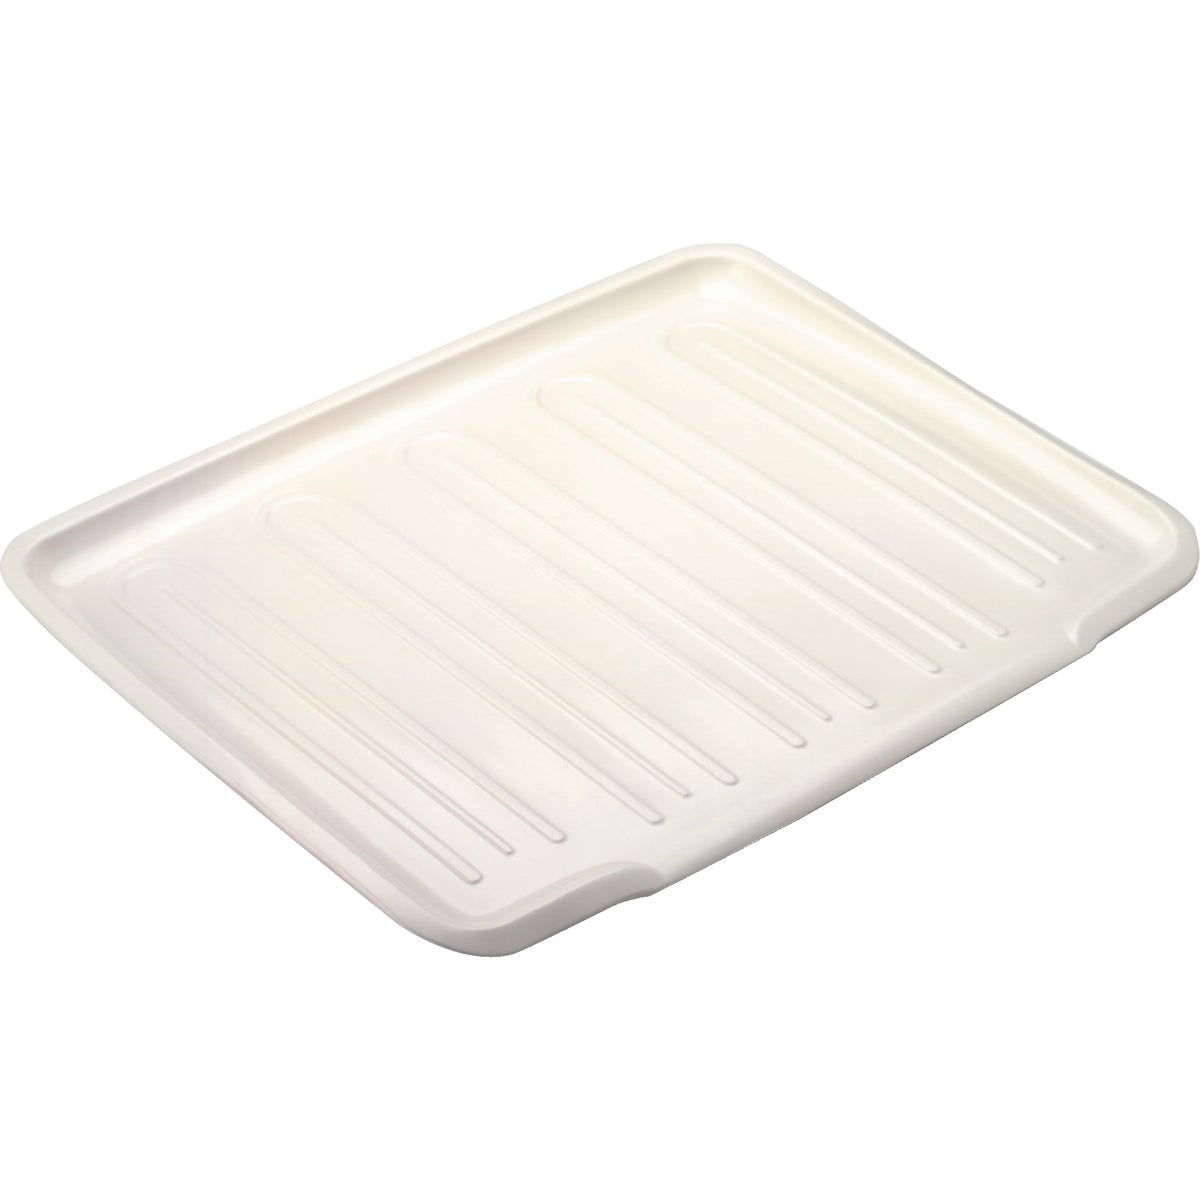 Rubbermaid Home 1182MABISQU Large Drain-Away Tray-LRG BISQUE DRAINER TRAY